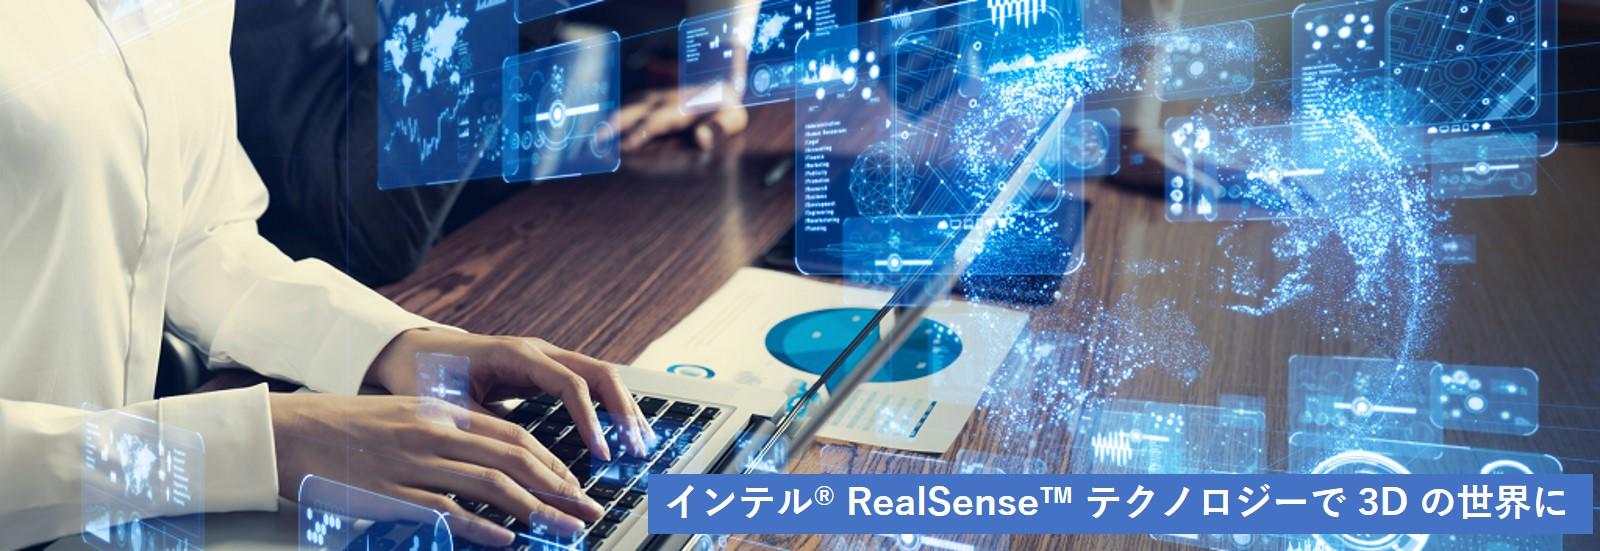 Enter the 3D World with Intel® RealSense™ Technology